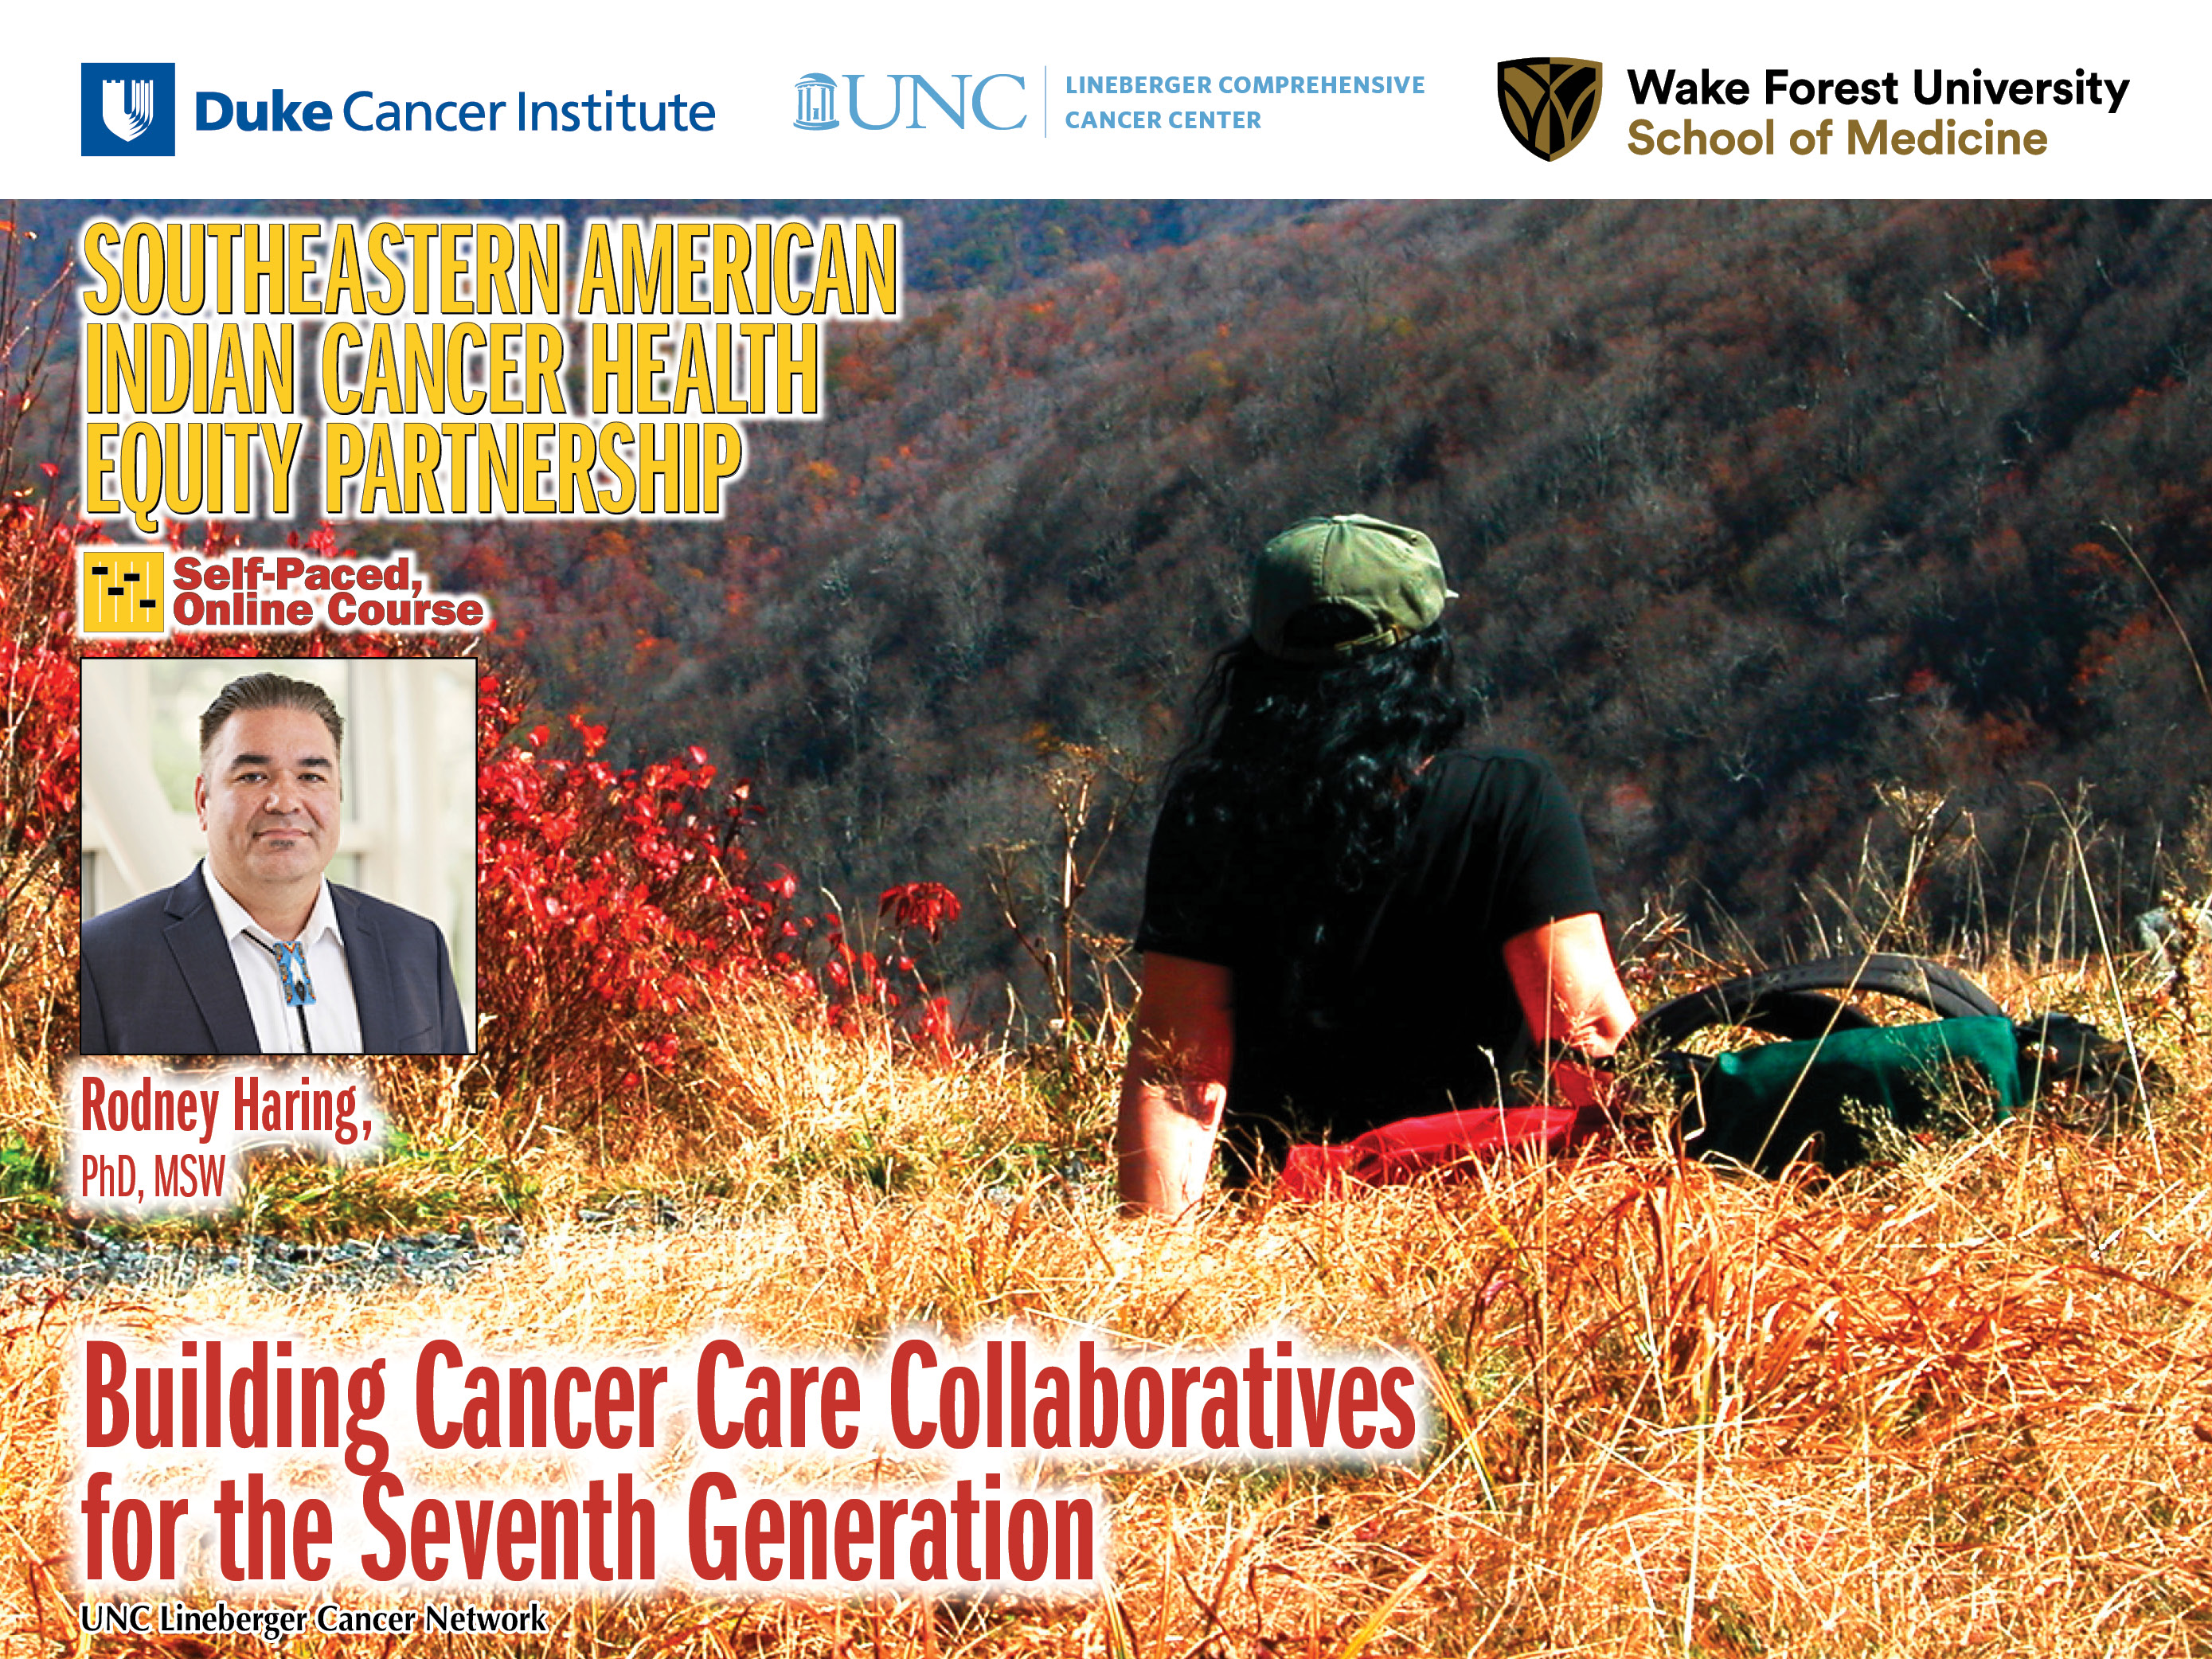 Building Cancer Care Collaboratives for the Seventh Generation